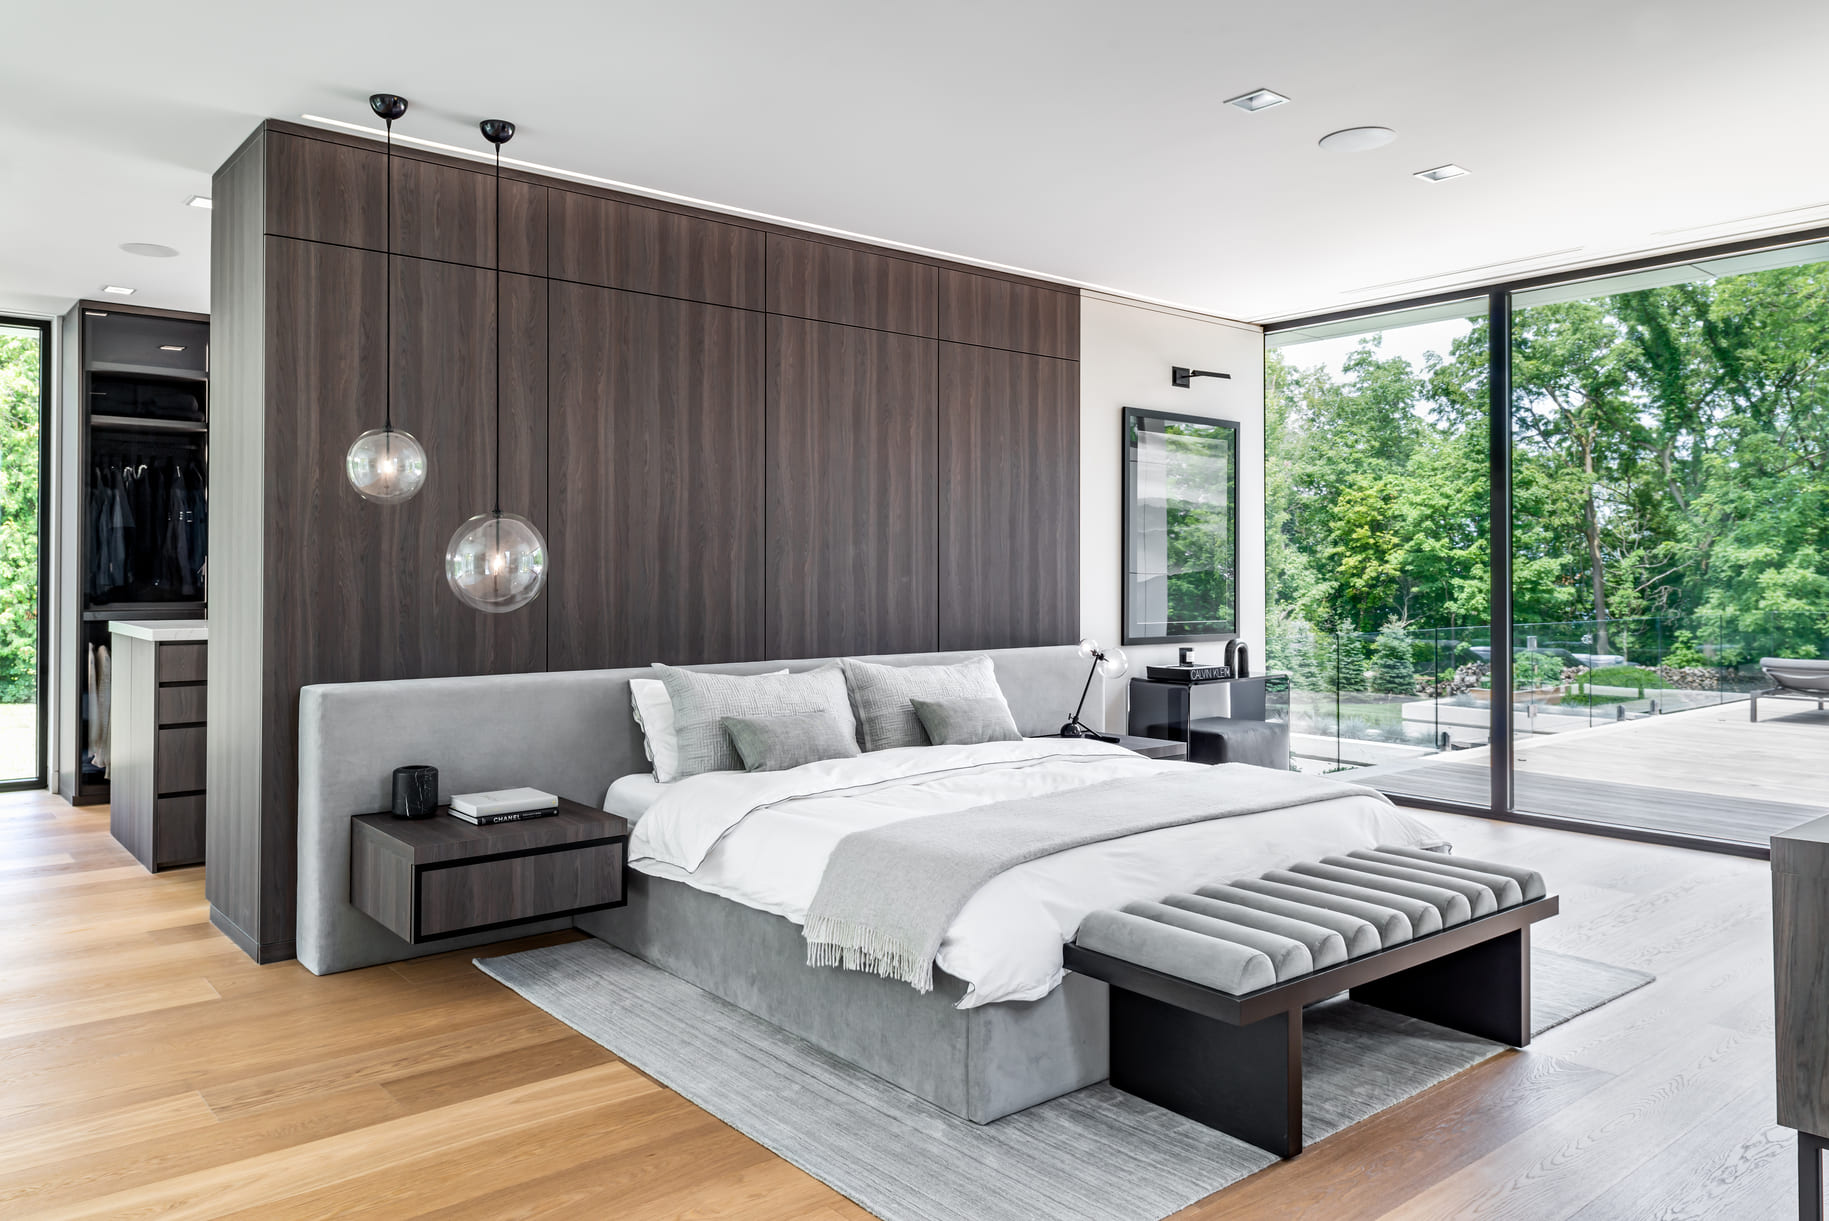 Large master bedroom with a feature wall and floor to ceiling glass windows.